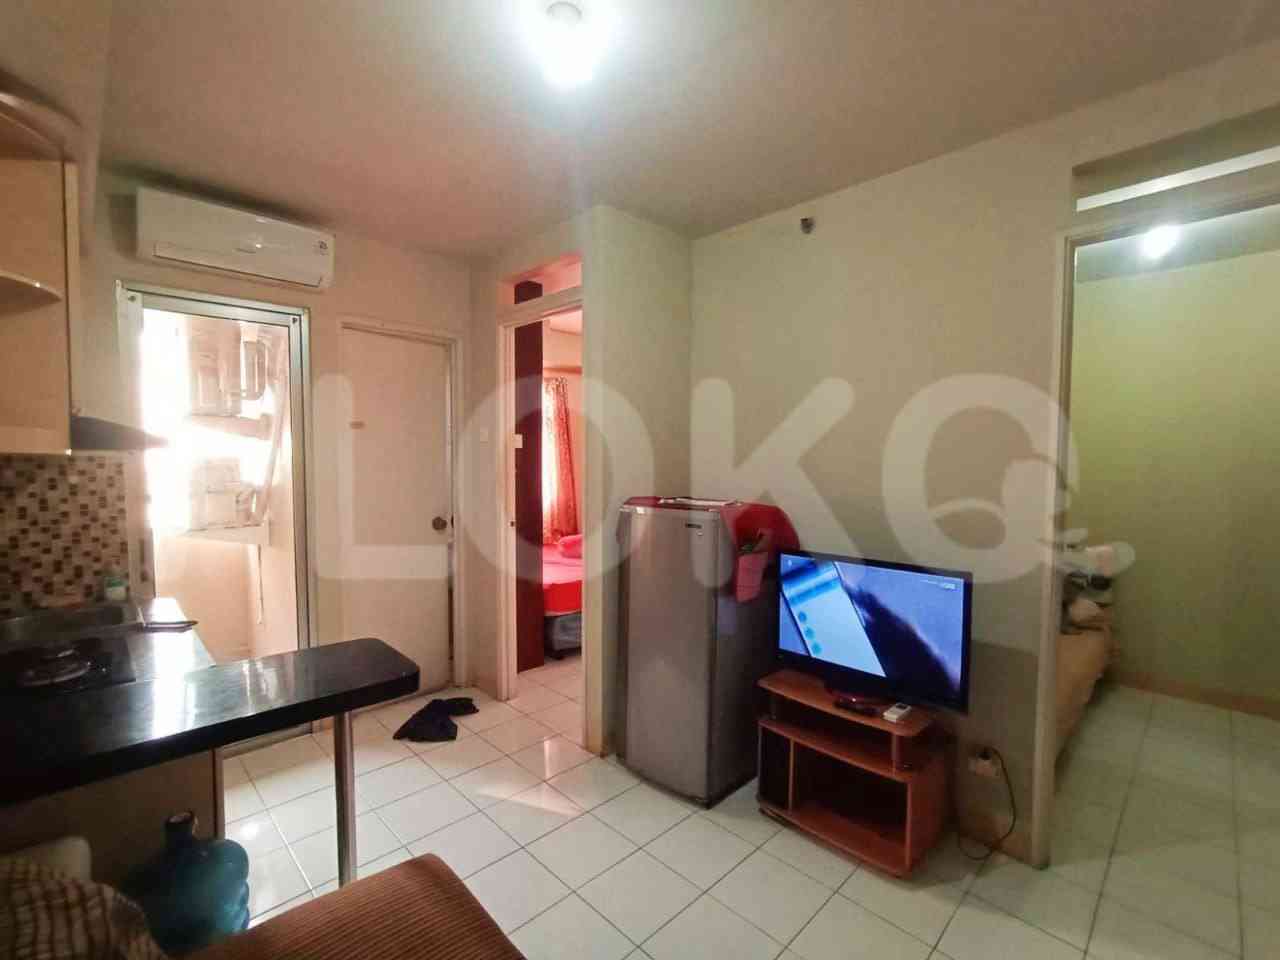 2 Bedroom on 19th Floor for Rent in Kalibata City Apartment - fpadfe 1